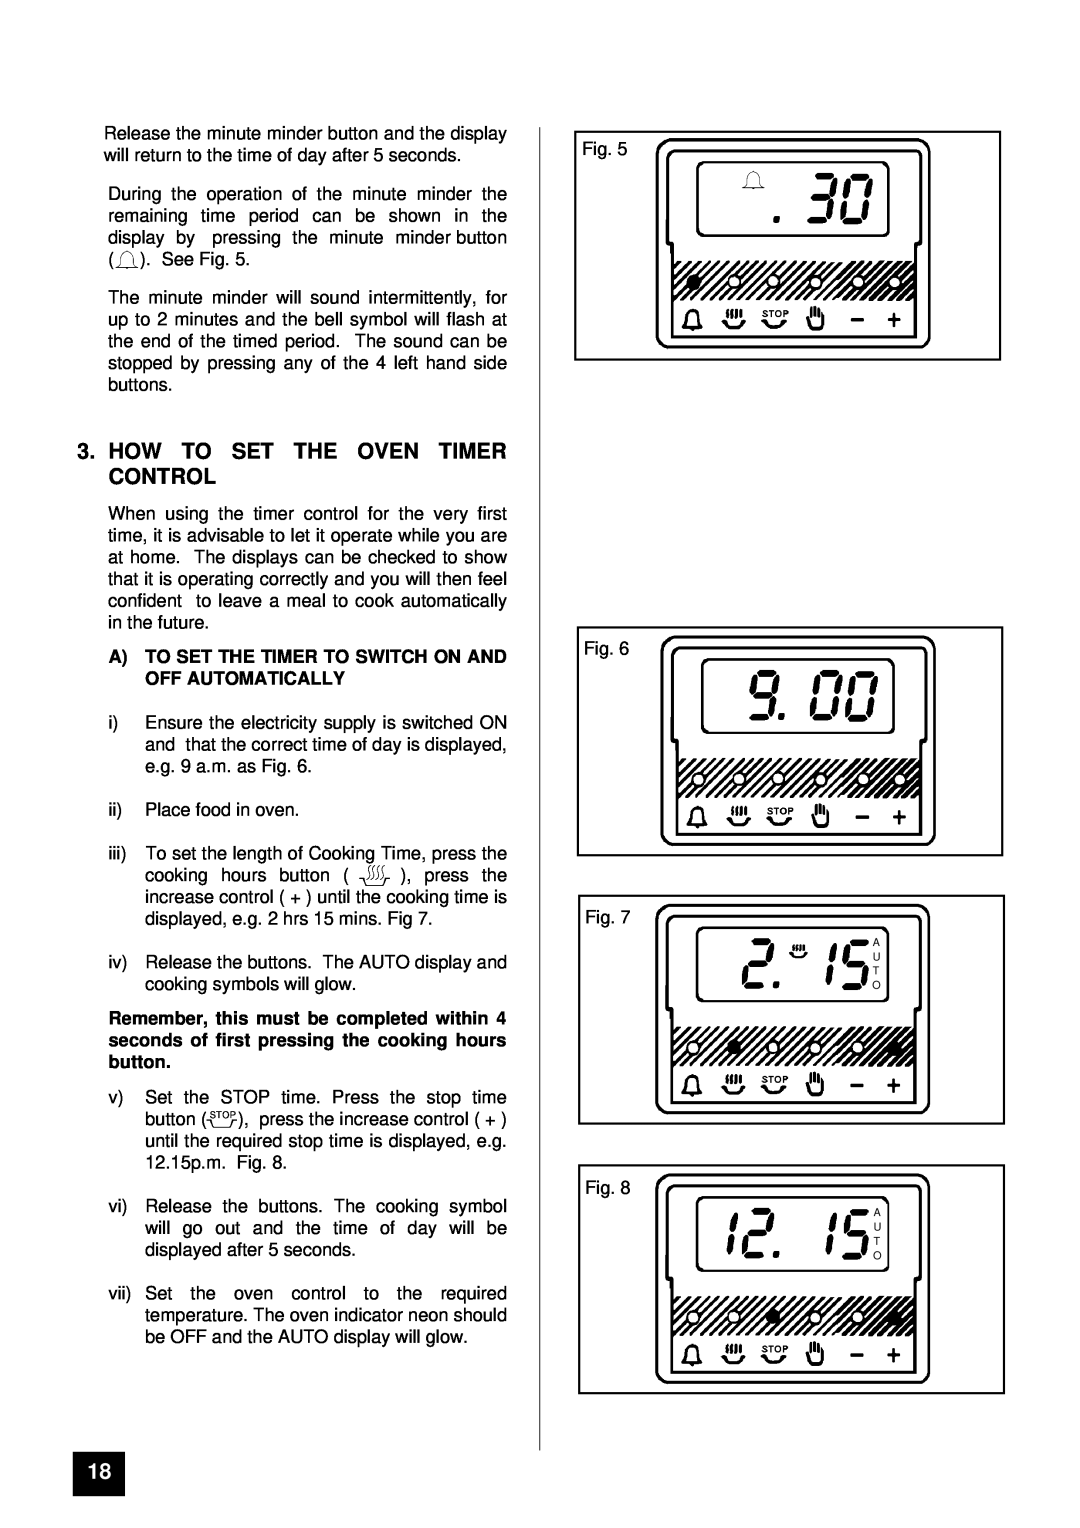 Tricity Bendix BS 613/2 How To Set The Oven Timer Control, A To Set The Timer To Switch On And Off Automatically 